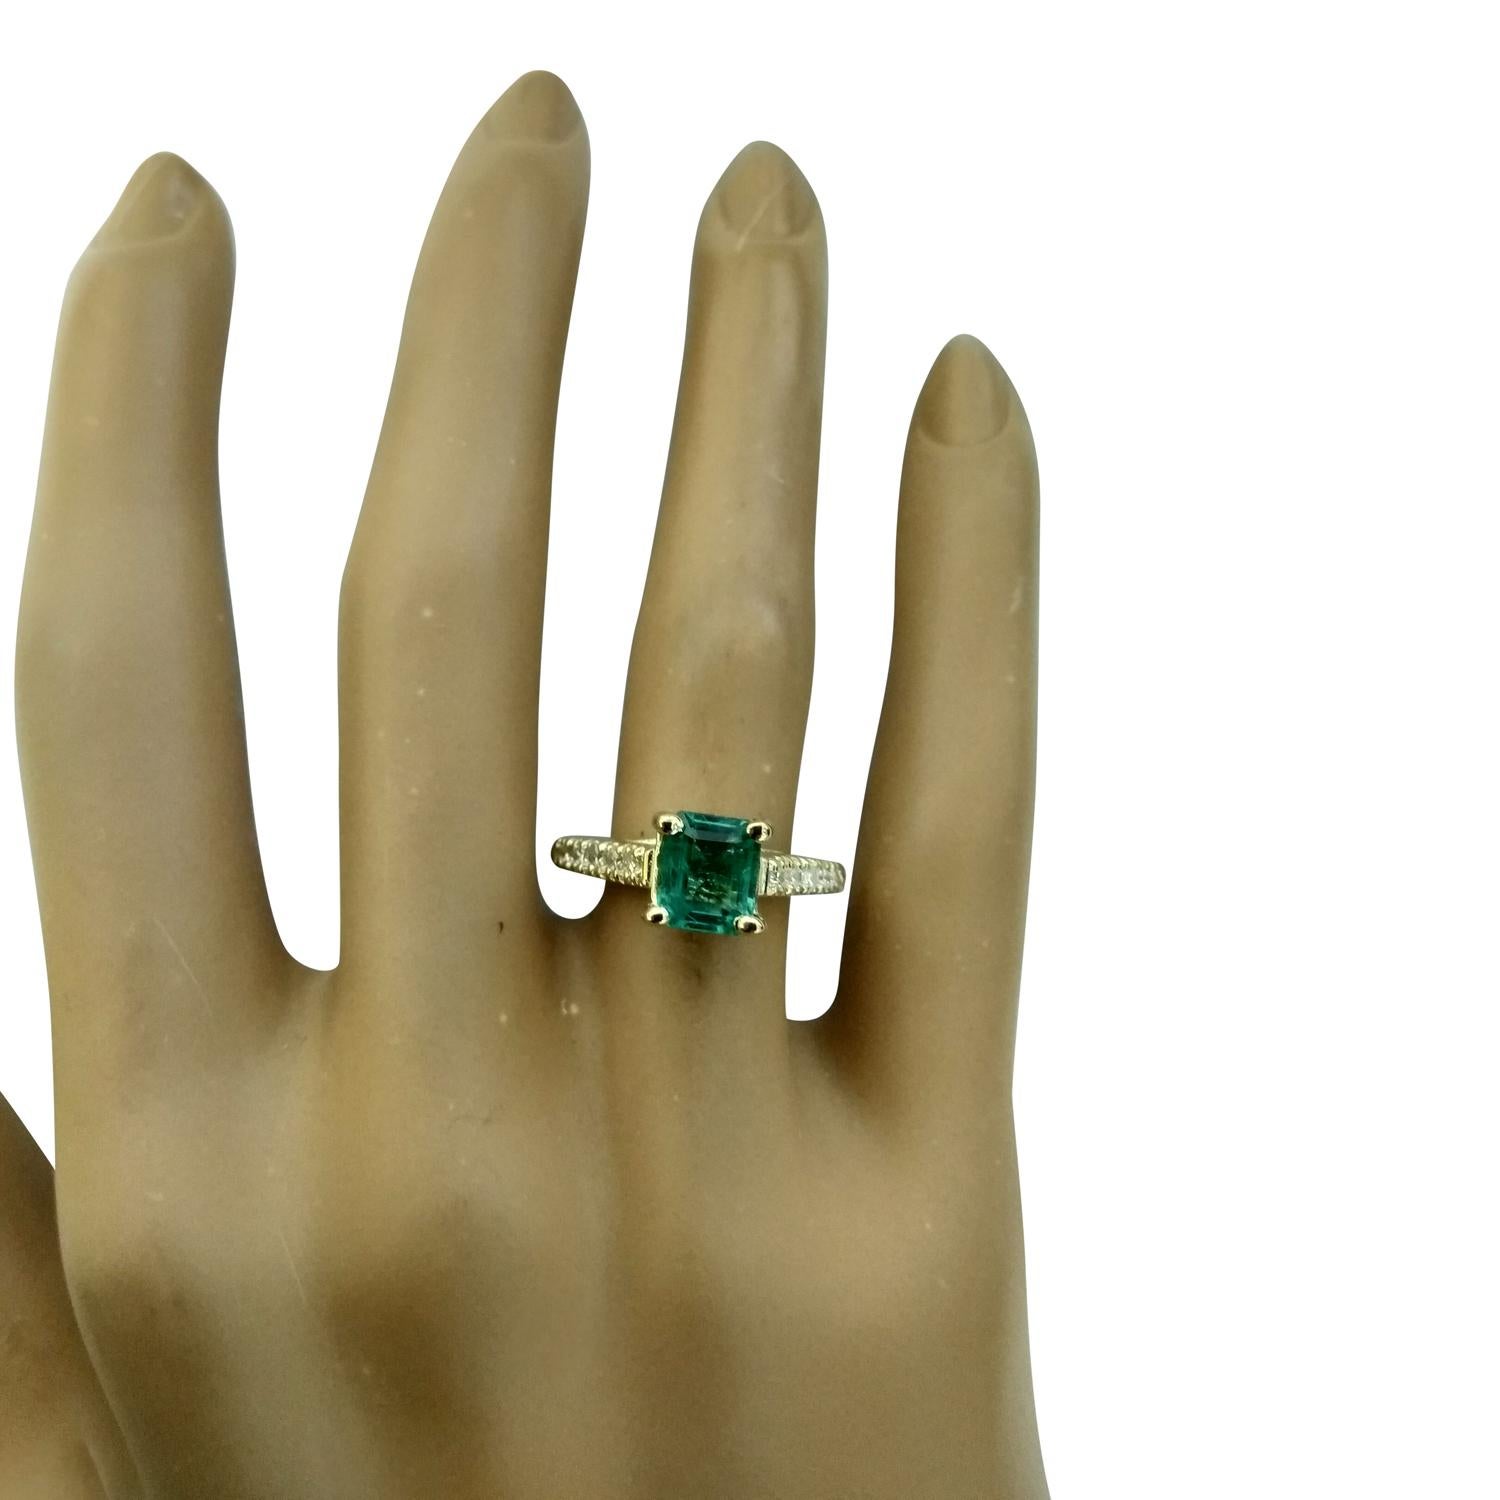 1.63 Carat Natural Emerald 14 Karat Solid Yellow Gold Diamond Ring
Stamped: 14K
Ring Size 7
Total Ring Weight: 4.1 Grams 
Emerald Weight 1.38 Carat (6.00x6.00 Millimeters)
Natural Emerald Treatment: Oil Only
Diamond Weight: 0.25 Carat (F-G Color,